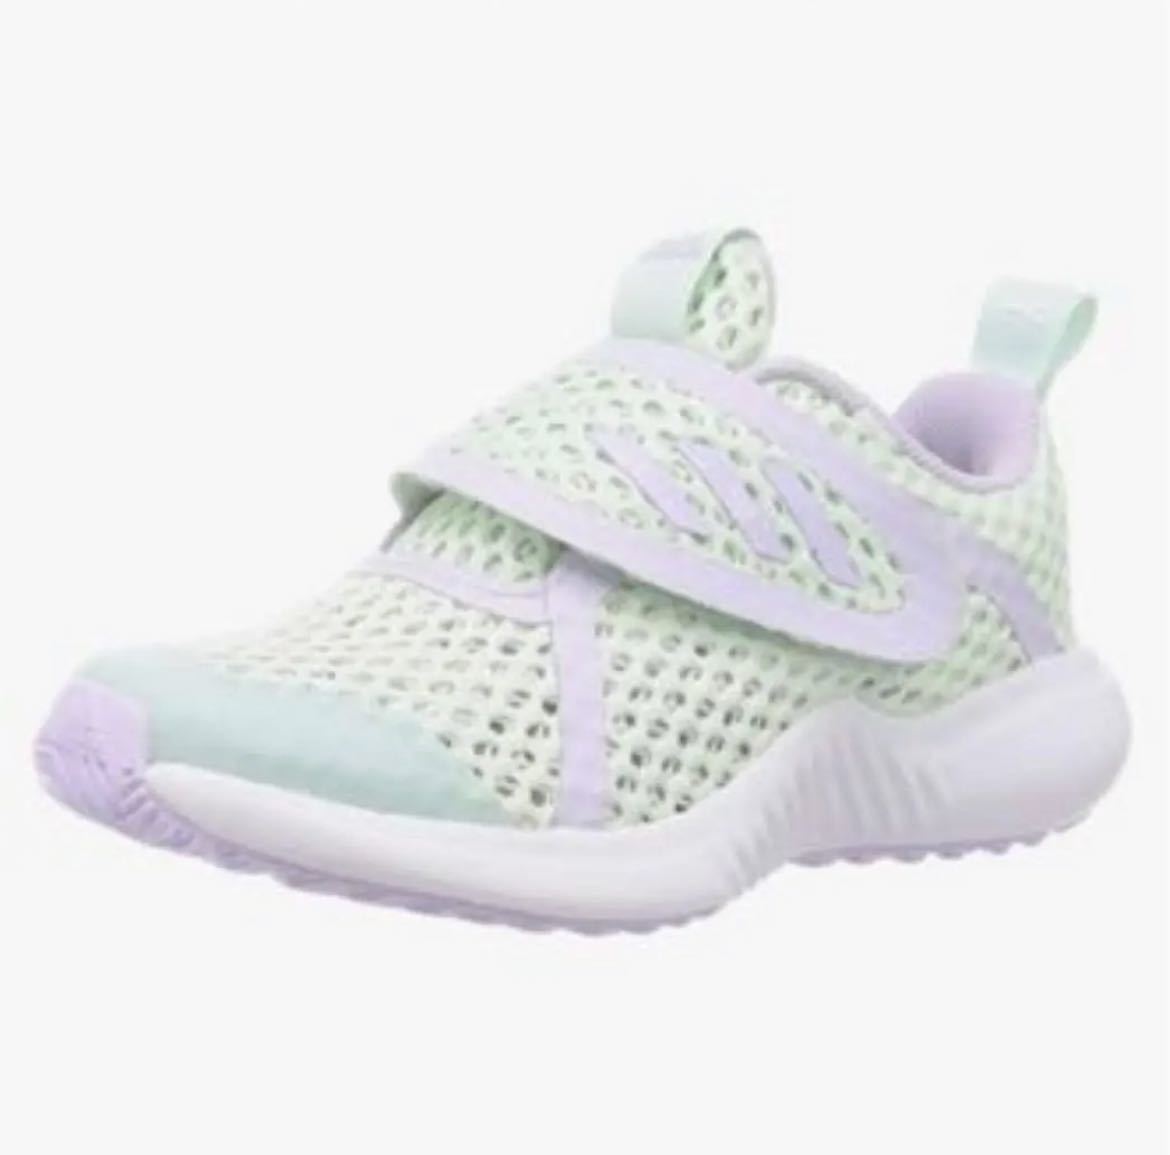 k20 new goods [ adidas Adidas ] summer shoes sport shoes sports bra ndo sneakers water shoes aqua shoes indoor shoes 24.5cm